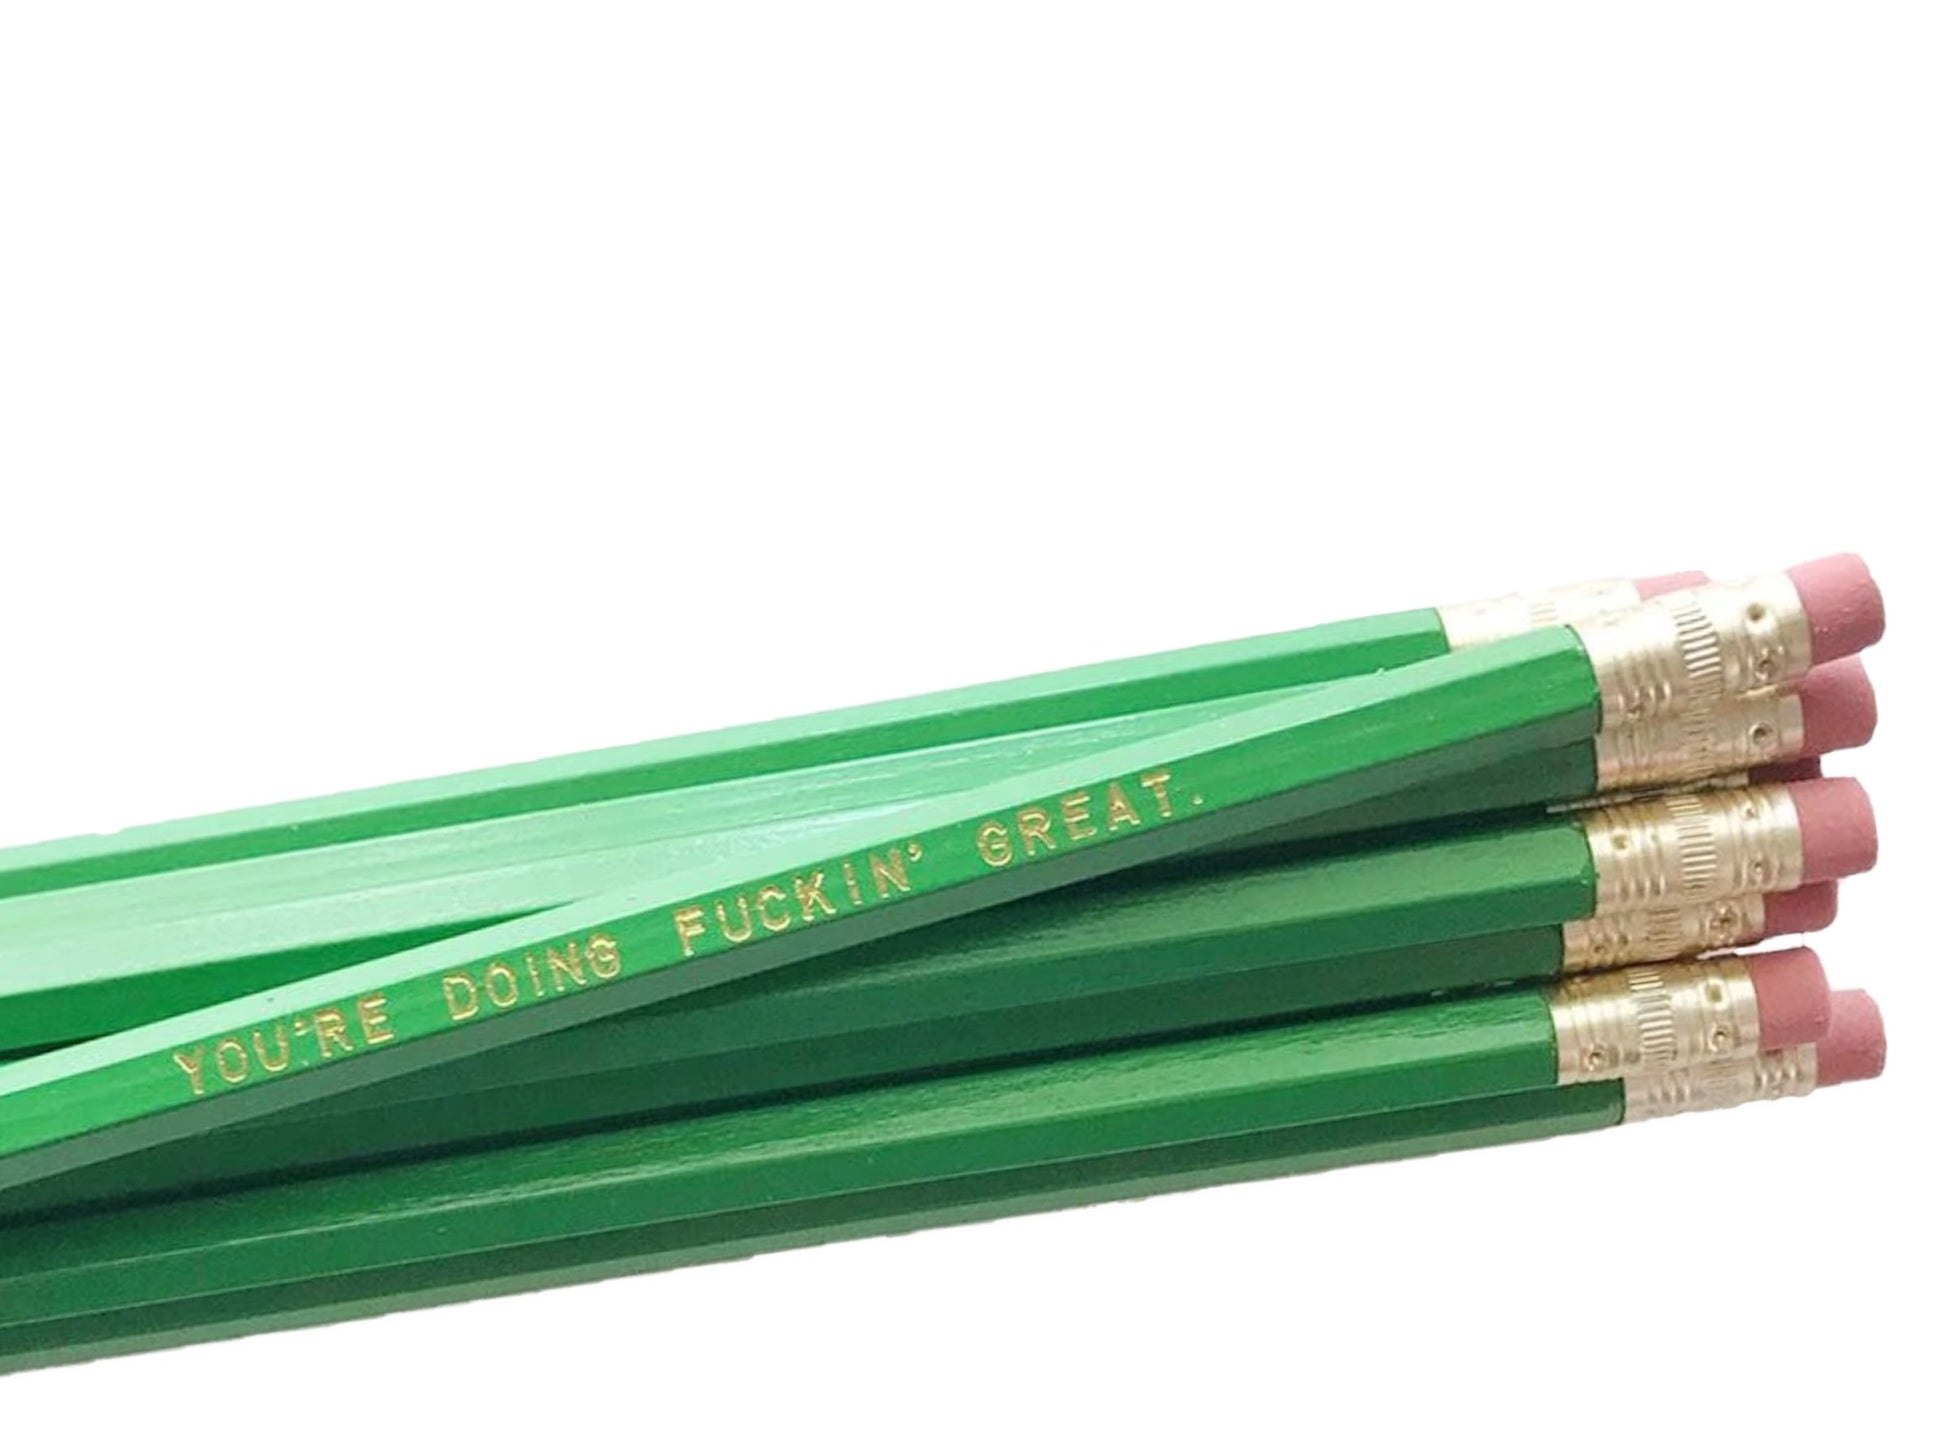 by Sweet Perversion. Listing for one You're Doing Fucking Great Pencil. Wood pencil with #2 lead, certified non-toxic, latex-free synthetic eraser and unsharpened. 